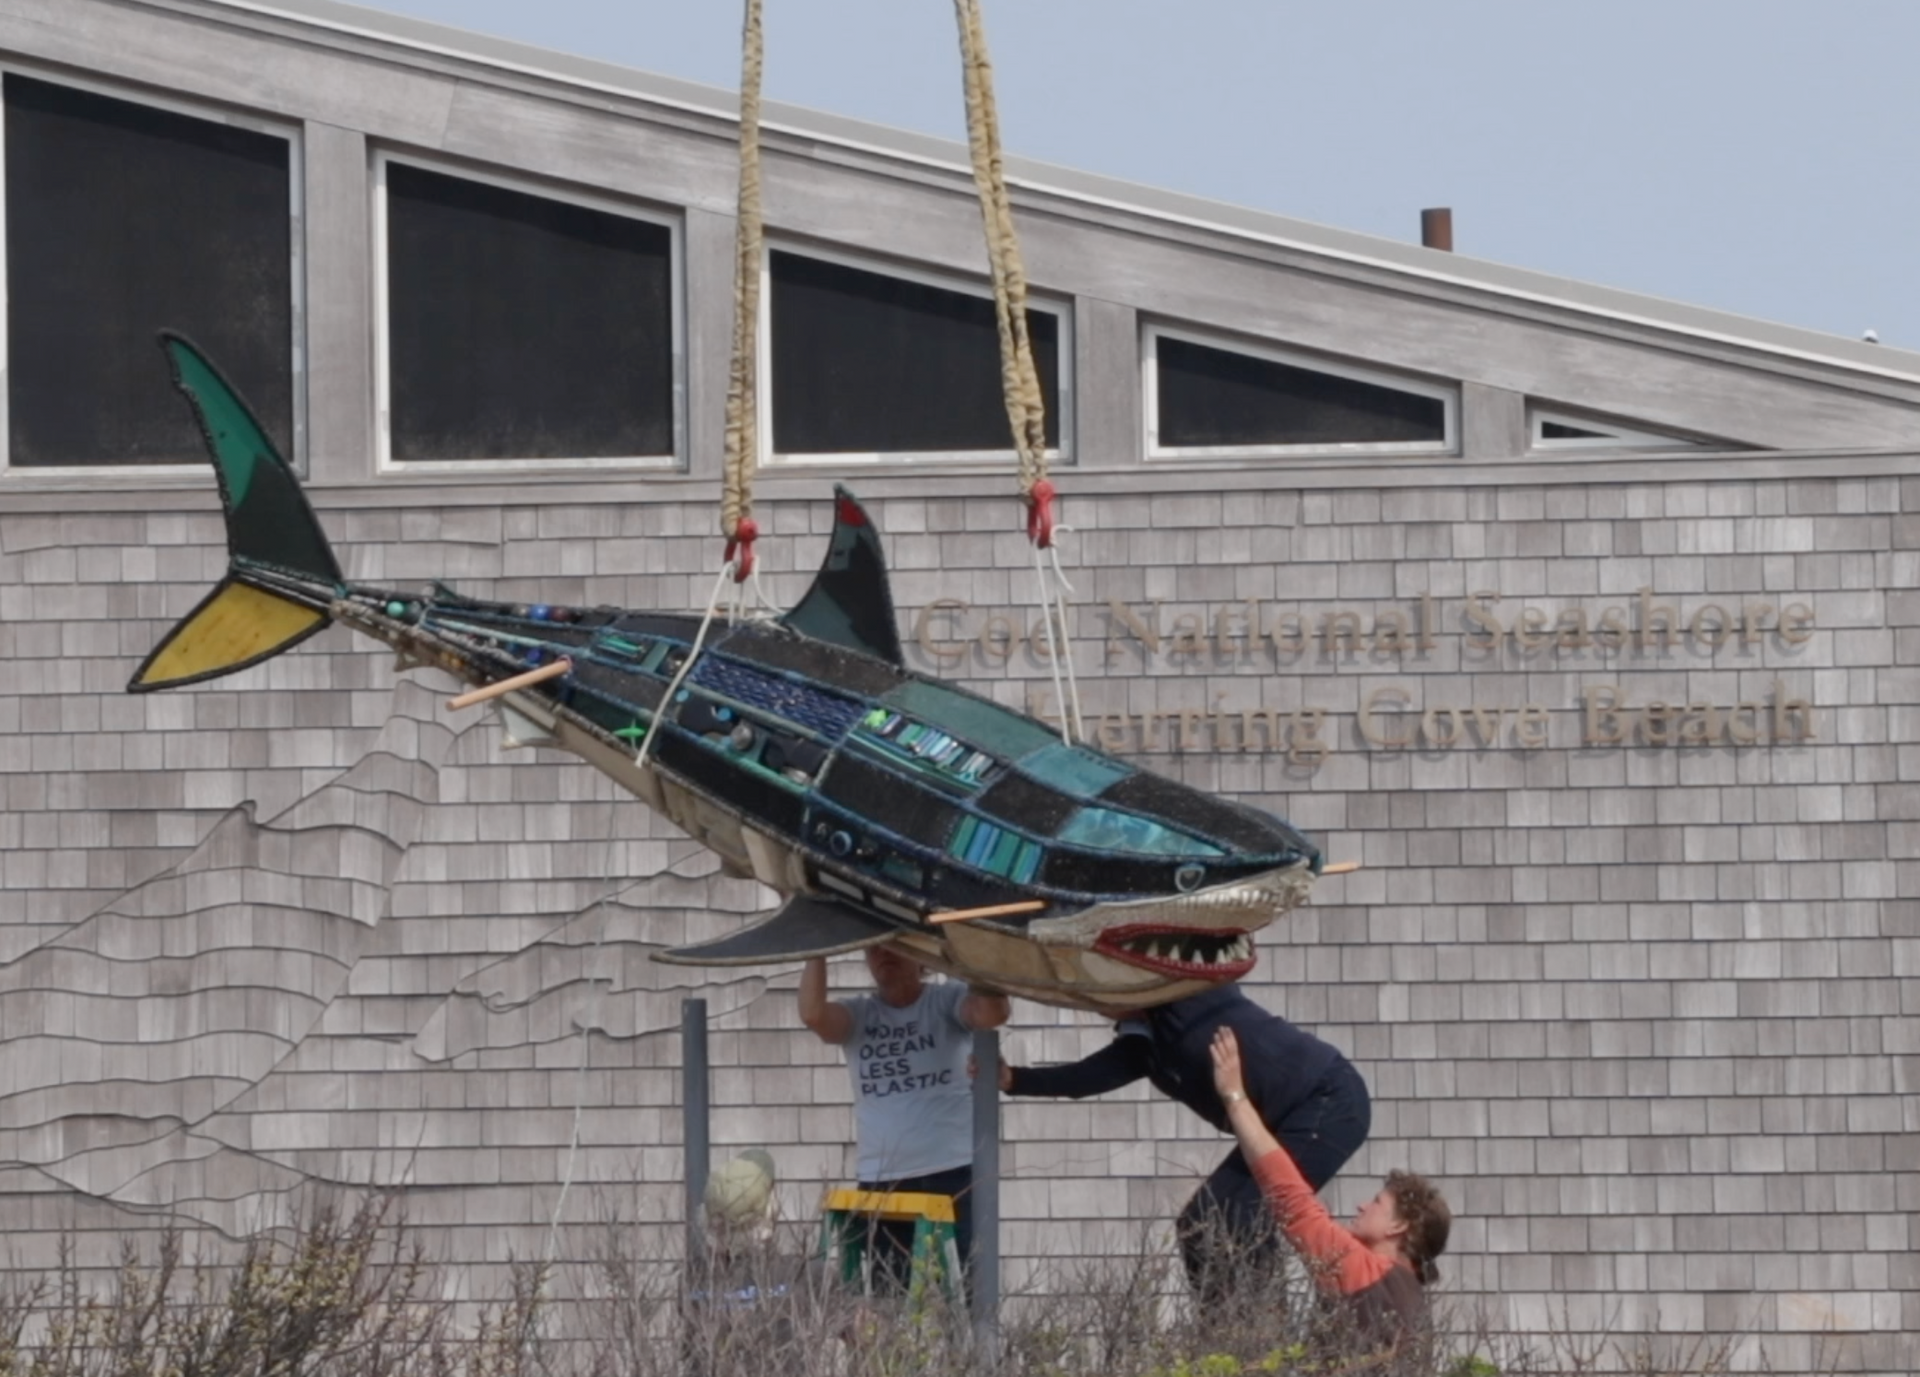 Cindy Pease Roe's sculpture made out of beach trash is installed in Herring Cove Beach in Ptown